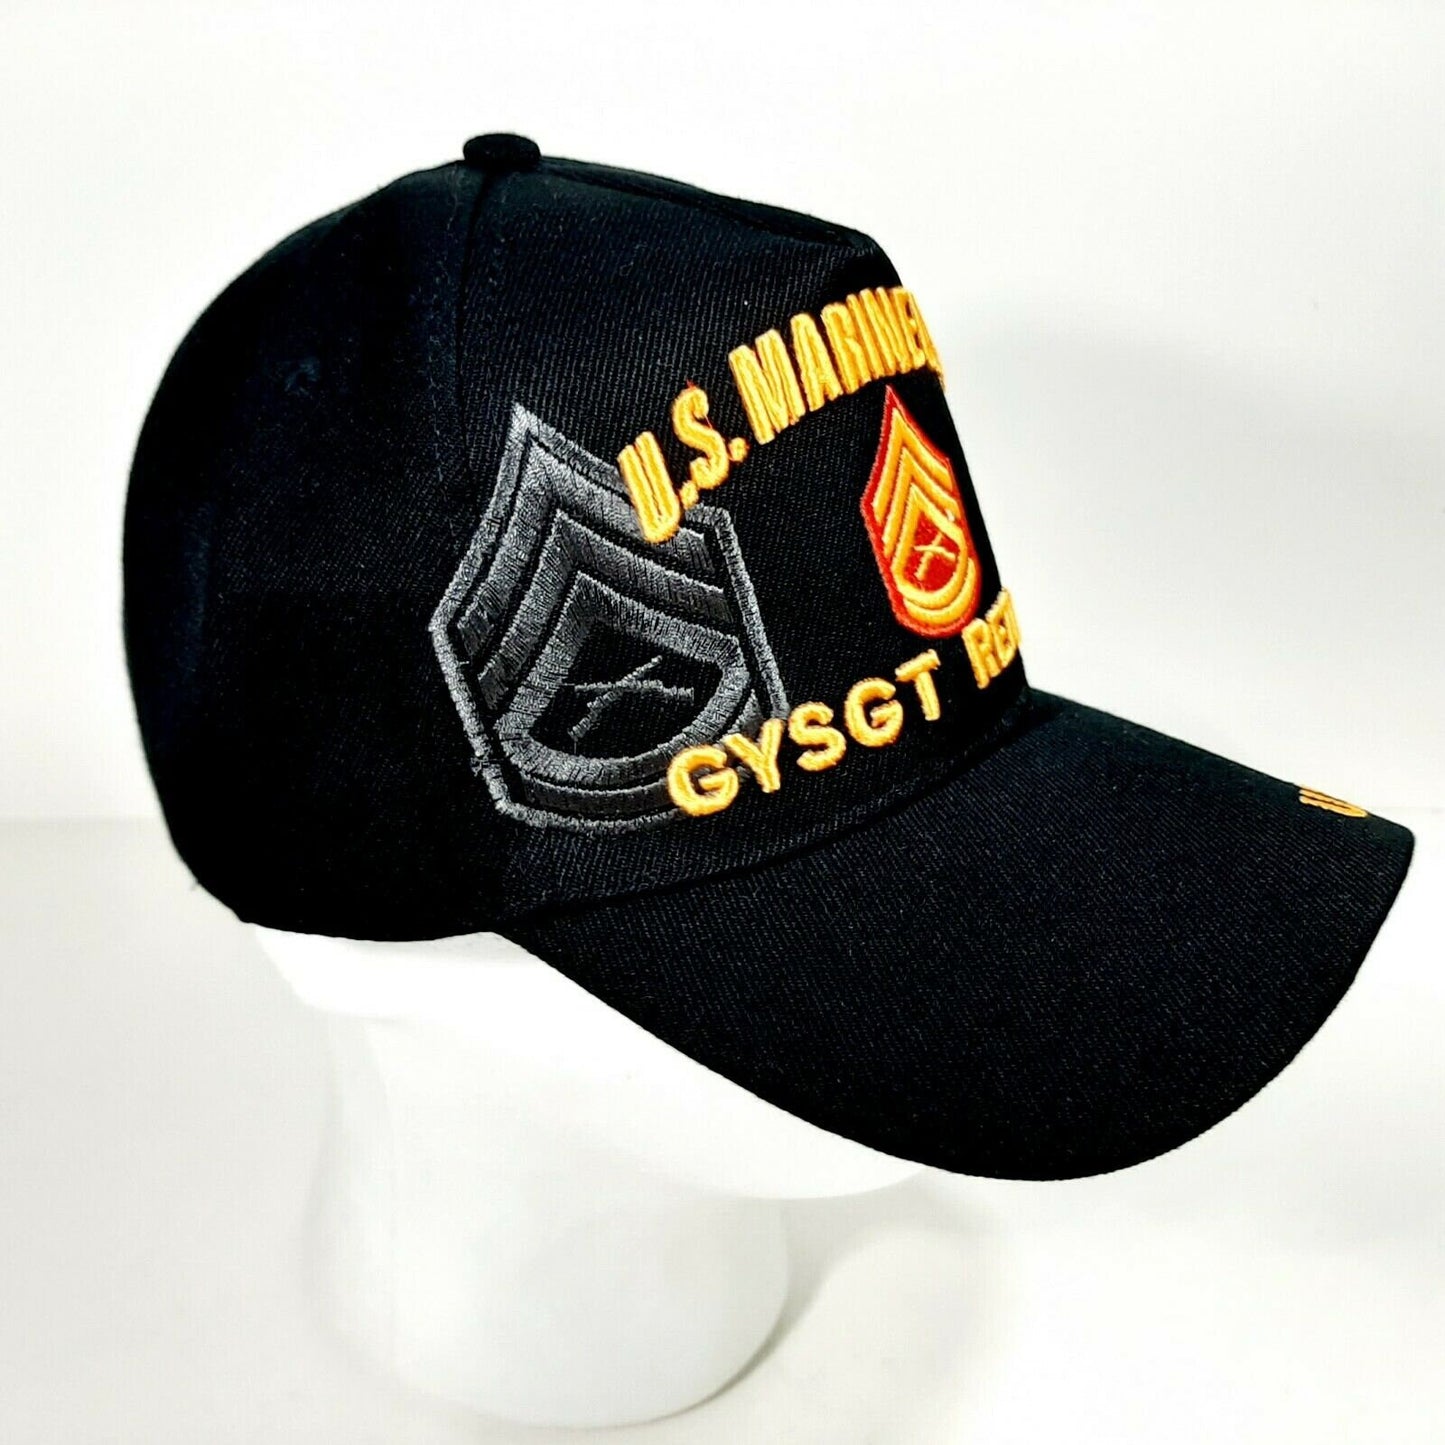 US Marine Corps GYSGT Retired Men's Ball Cap Hat Black Embroidered Acrylic